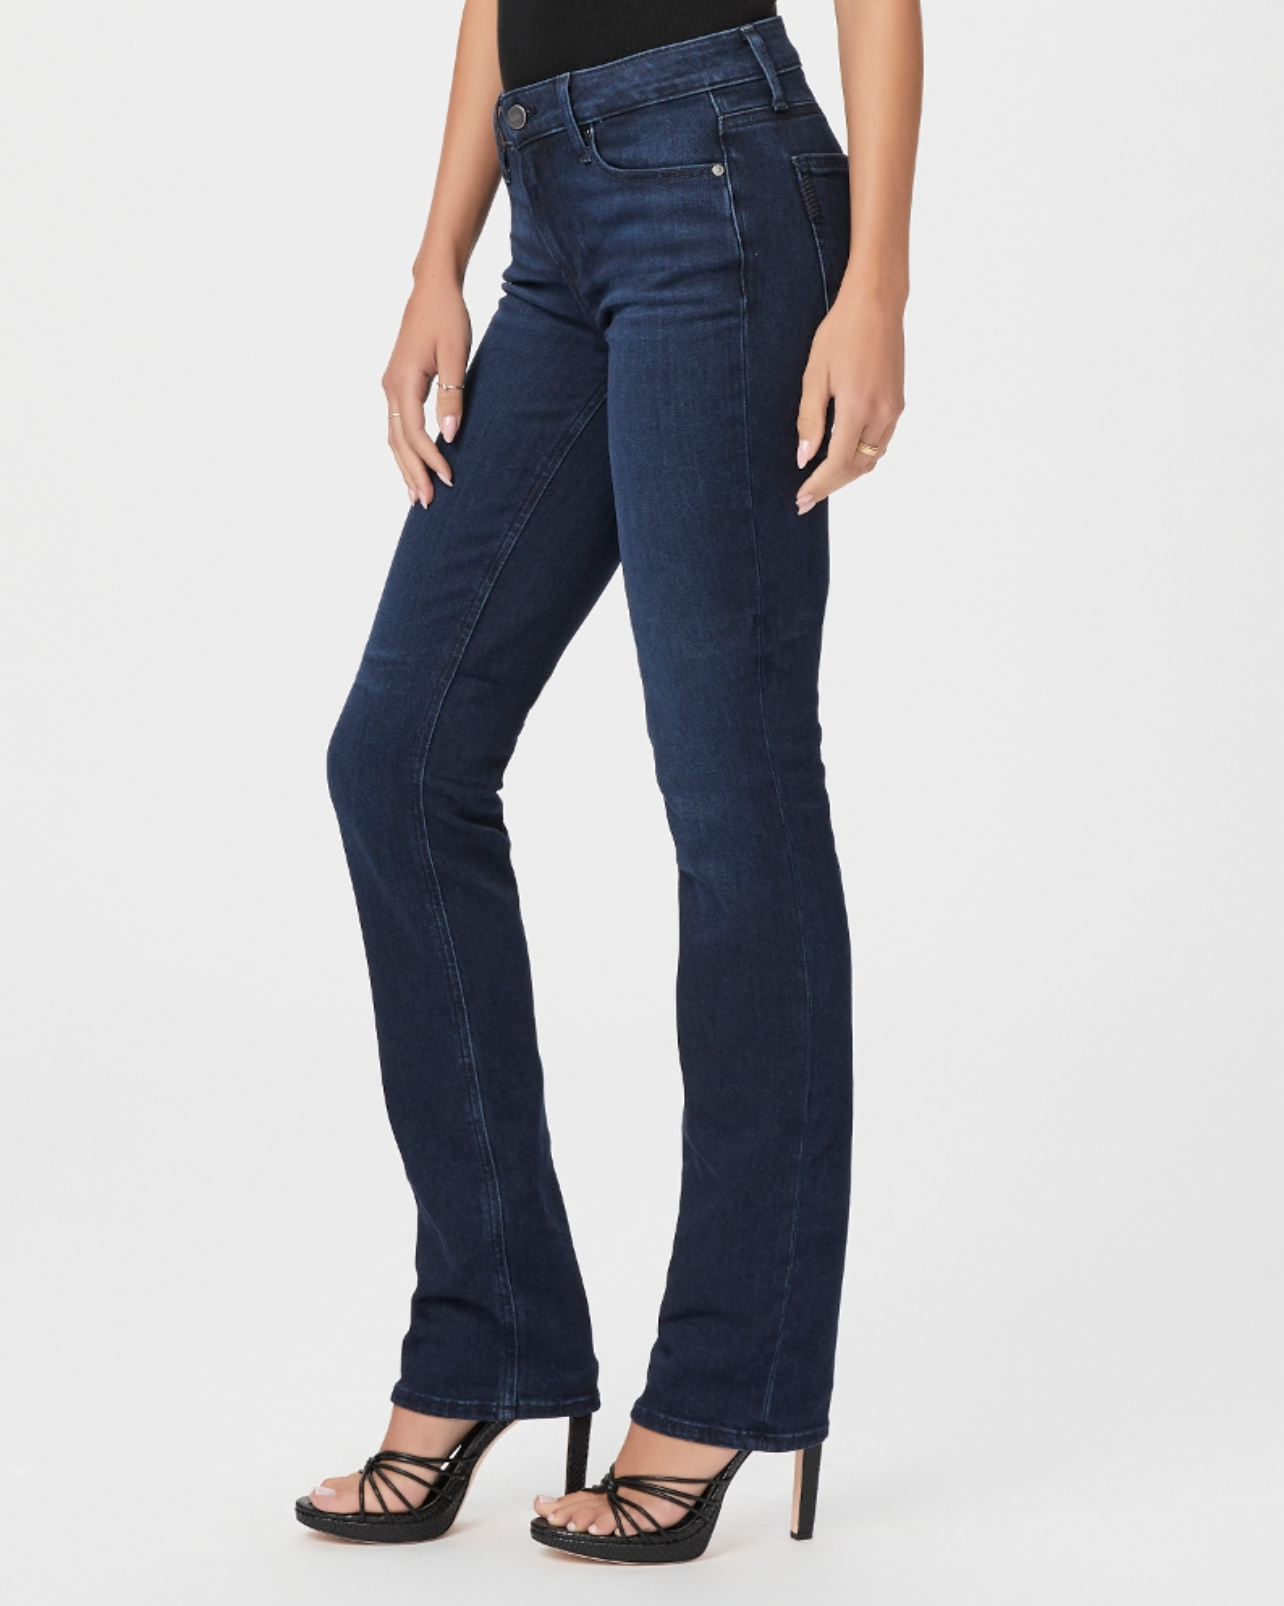 waist down side view of the skyline mid rise straight jean from paige in manifesto dark blue